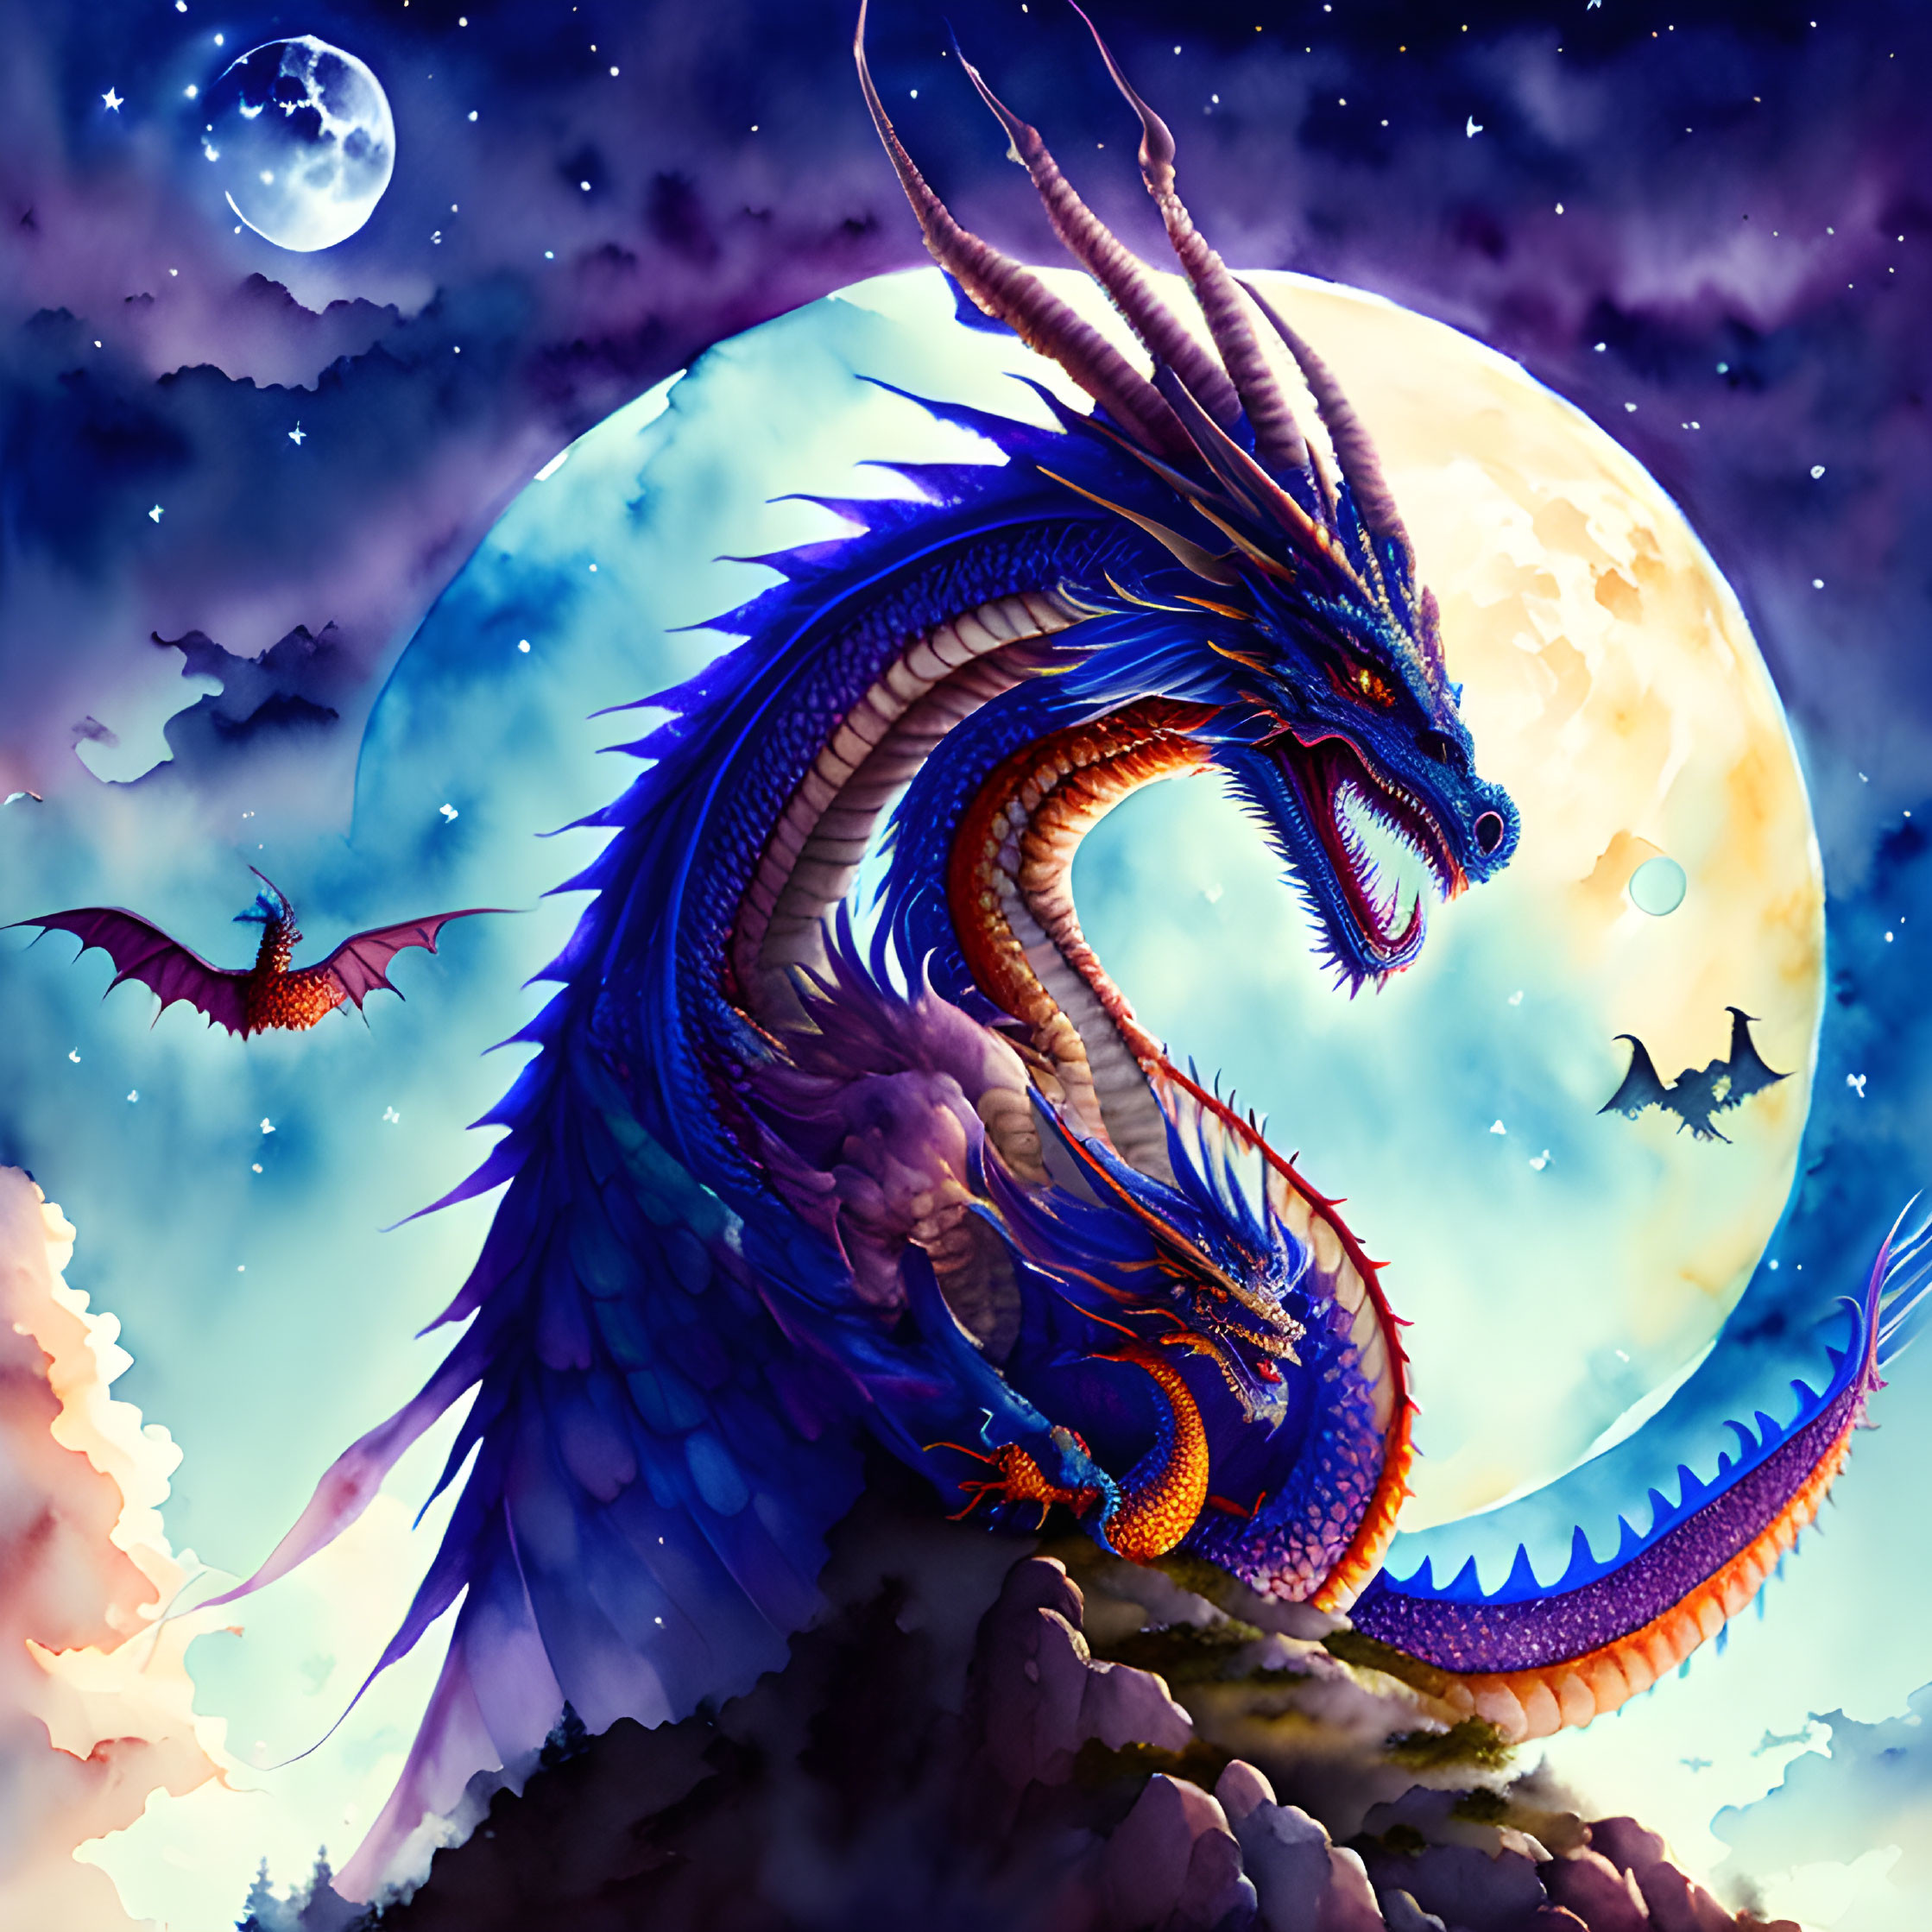 Majestic blue and orange dragon on cliff under twilight sky with full moon